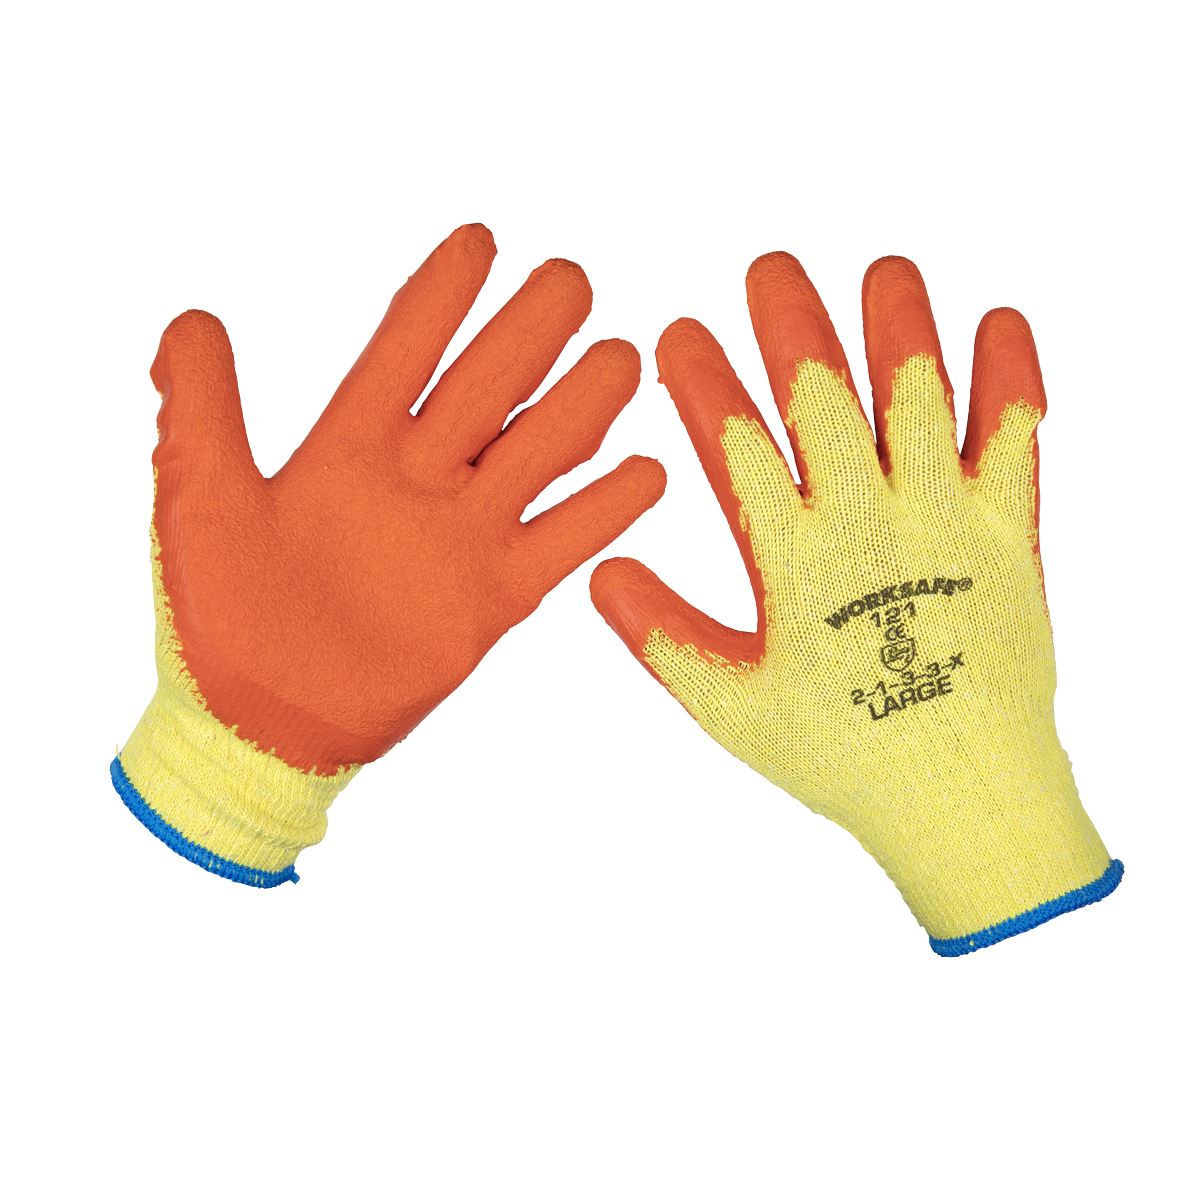 Worksafe by Sealey Super Grip Knitted Gloves Latex Palm (Large) - Pack of 120 Pairs